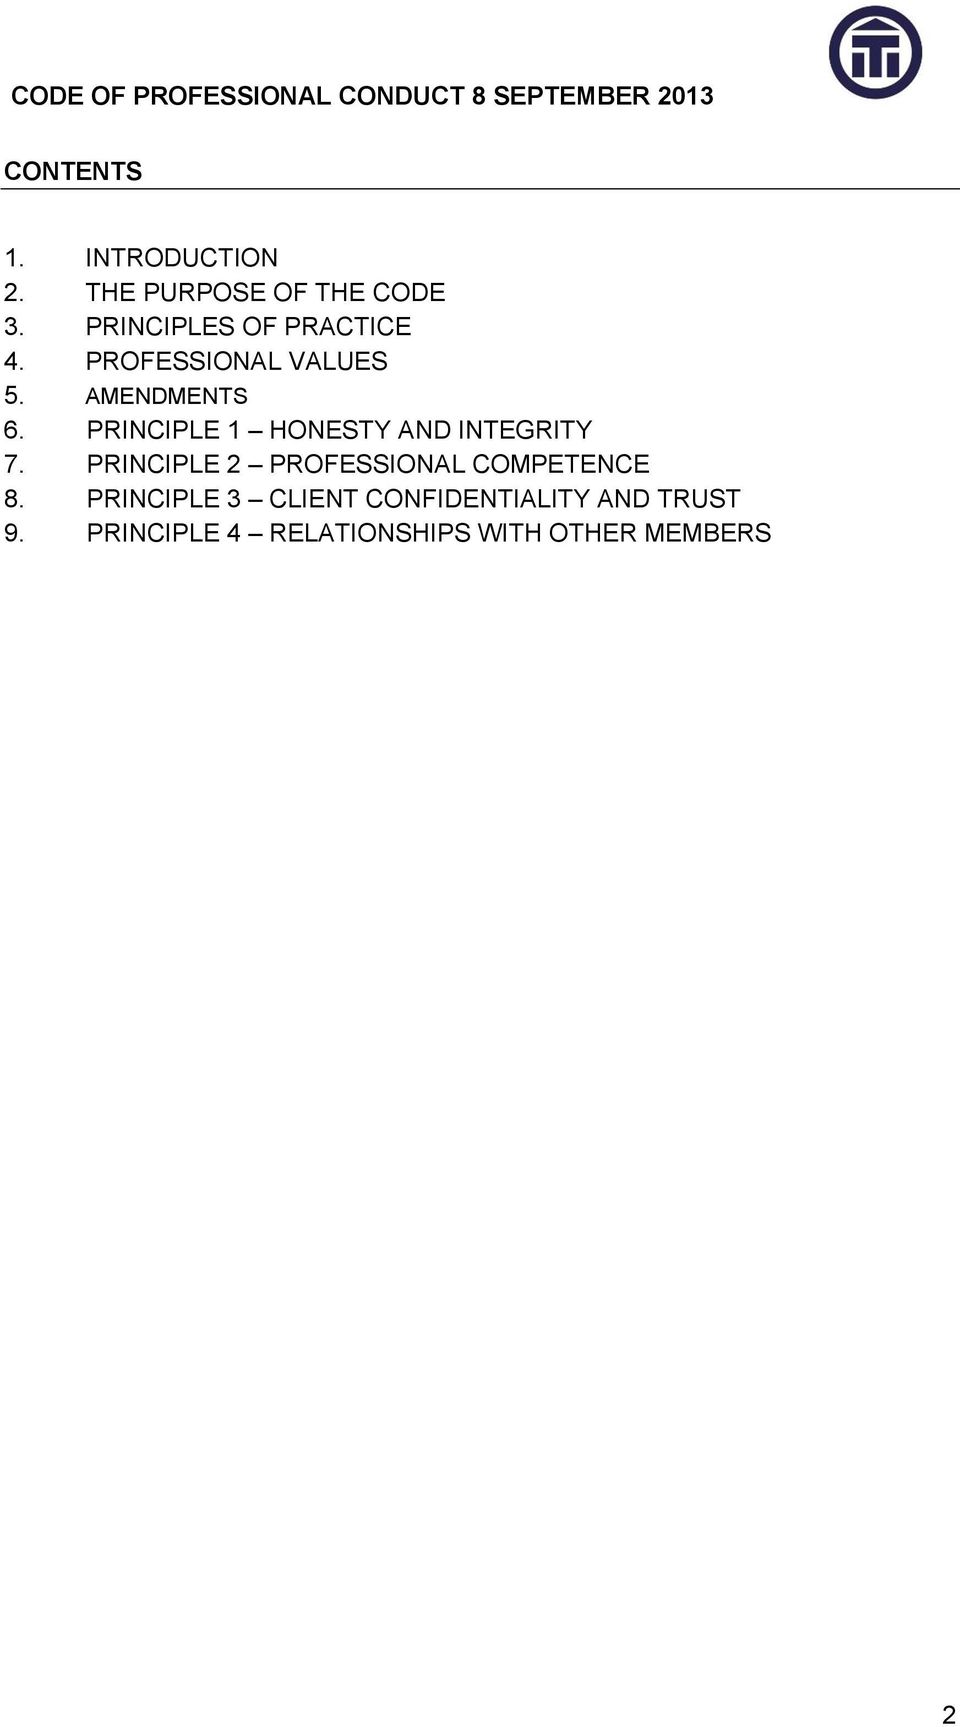 PRINCIPLE 1 HONESTY AND INTEGRITY 7.